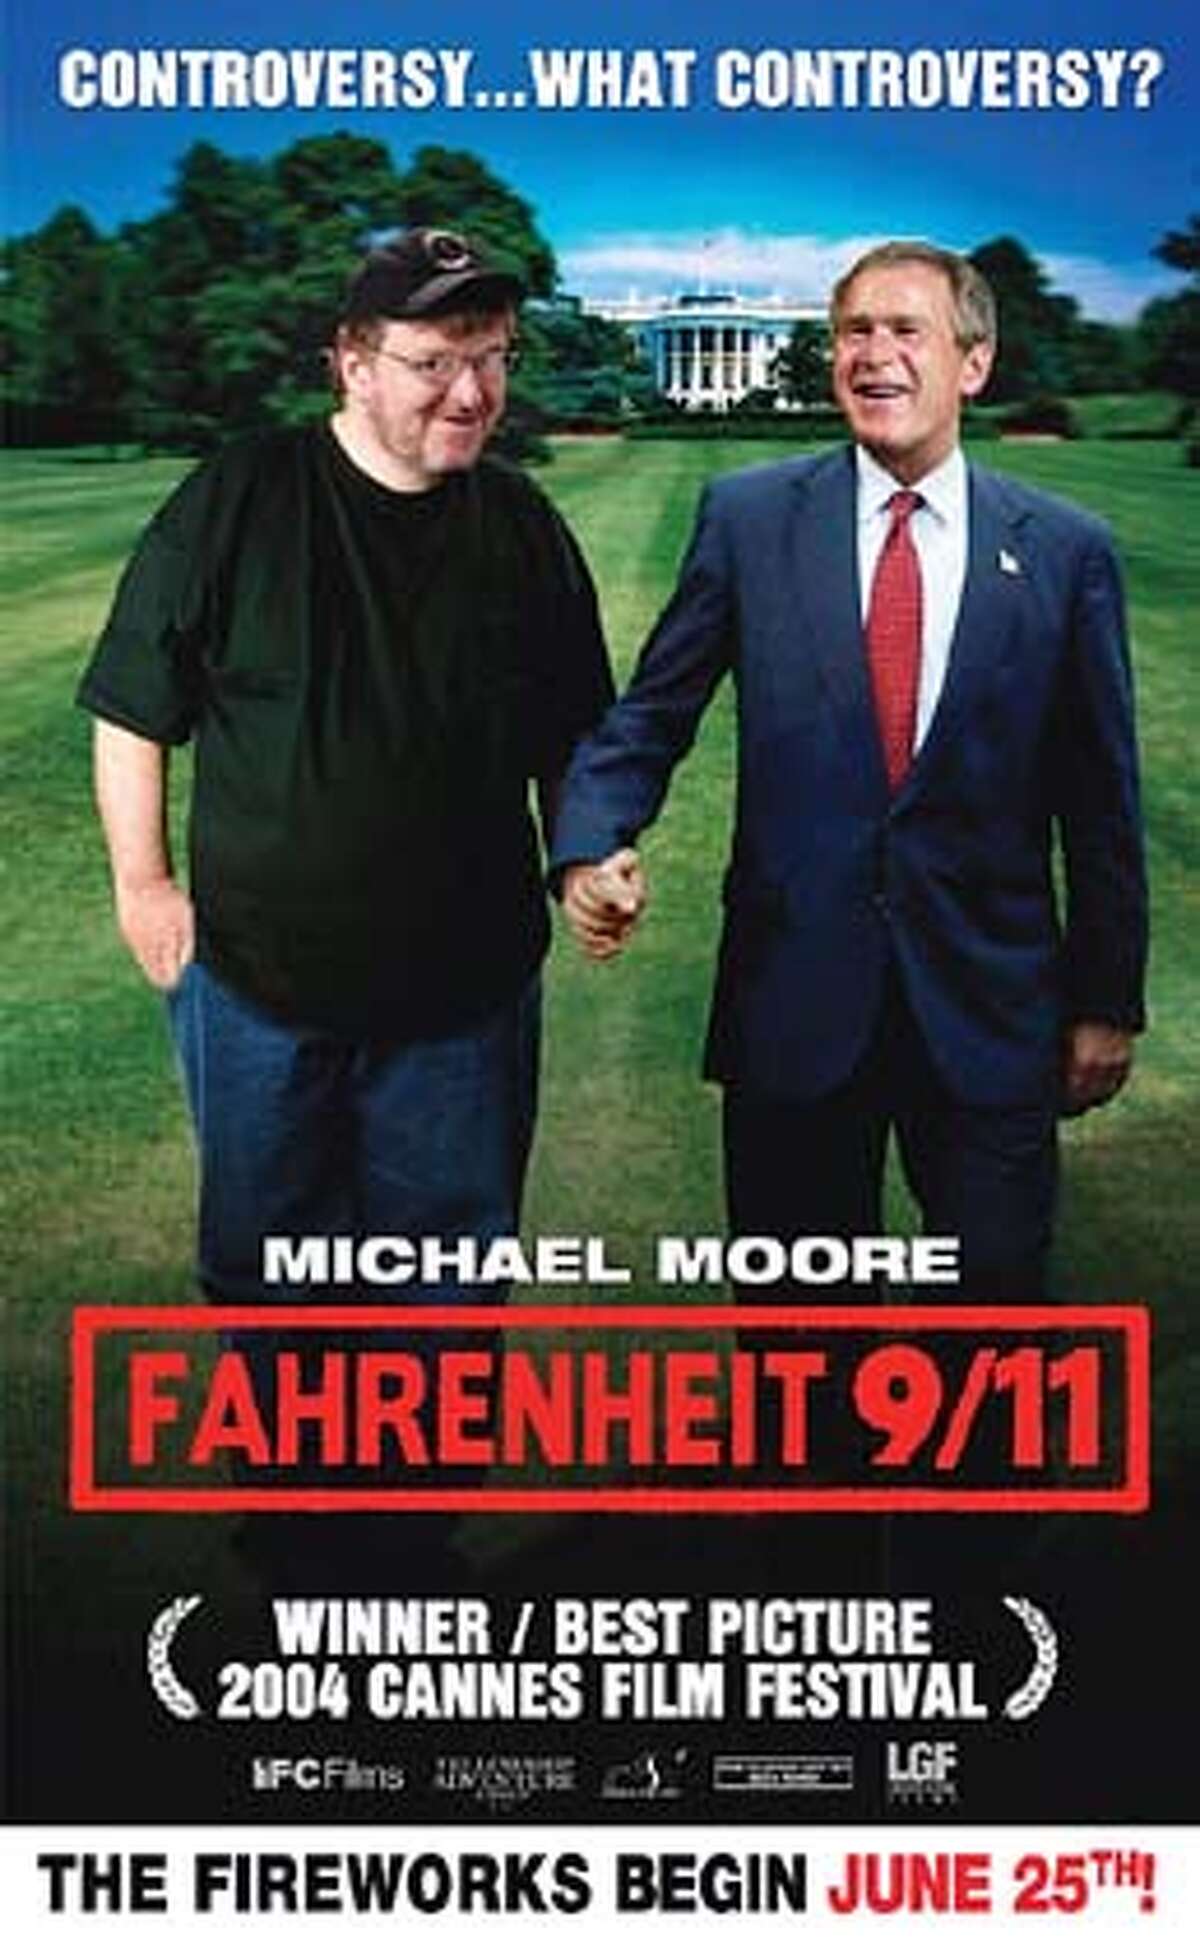 Michael Moore is not alone. These are heady days for documentary